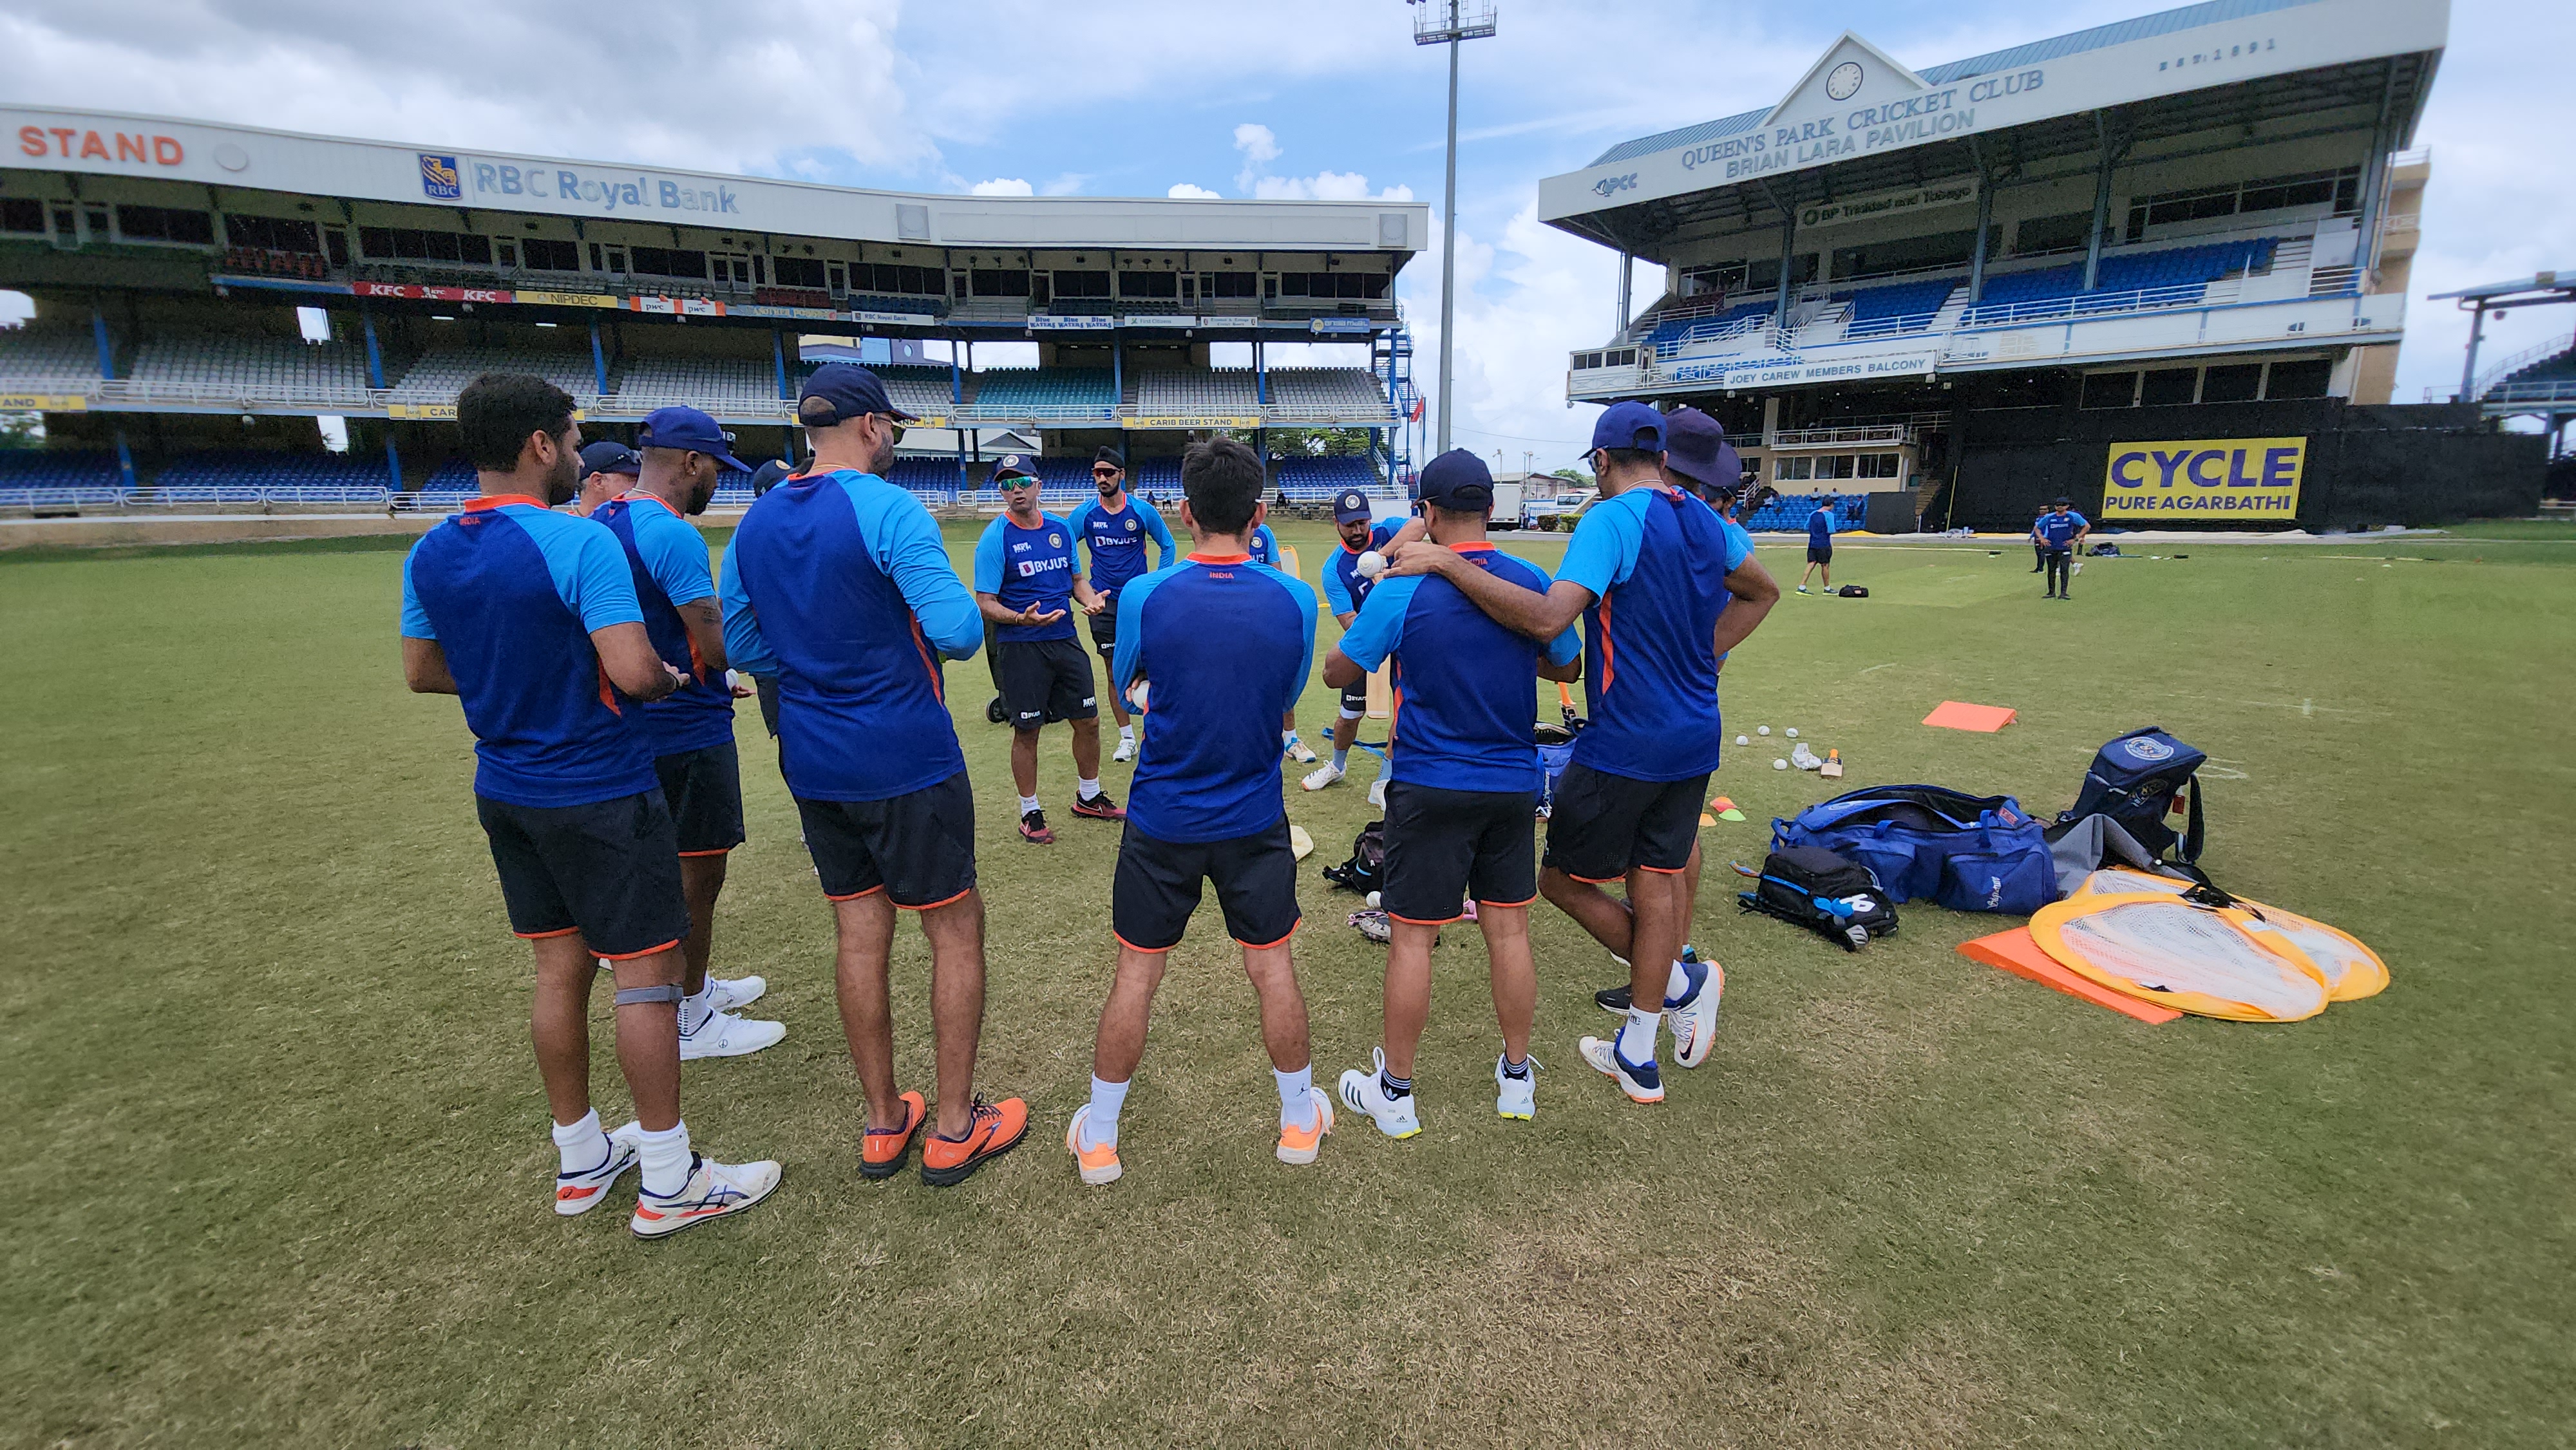 Team India preps for the 1st T20I | BCCI